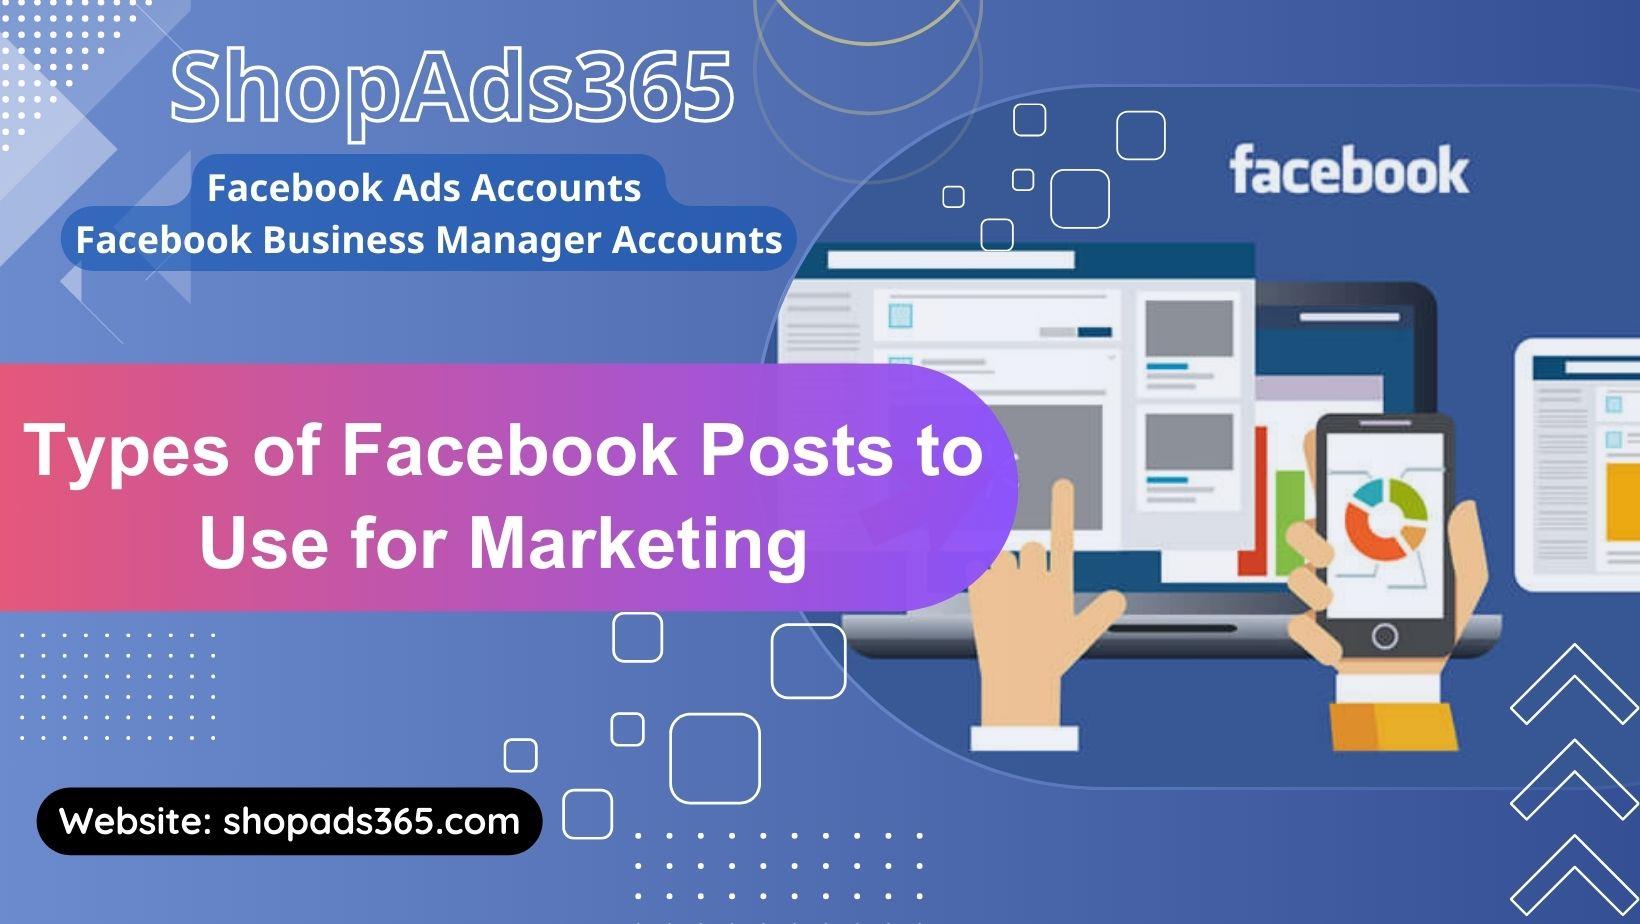 Types of Facebook Posts to Use for Marketing